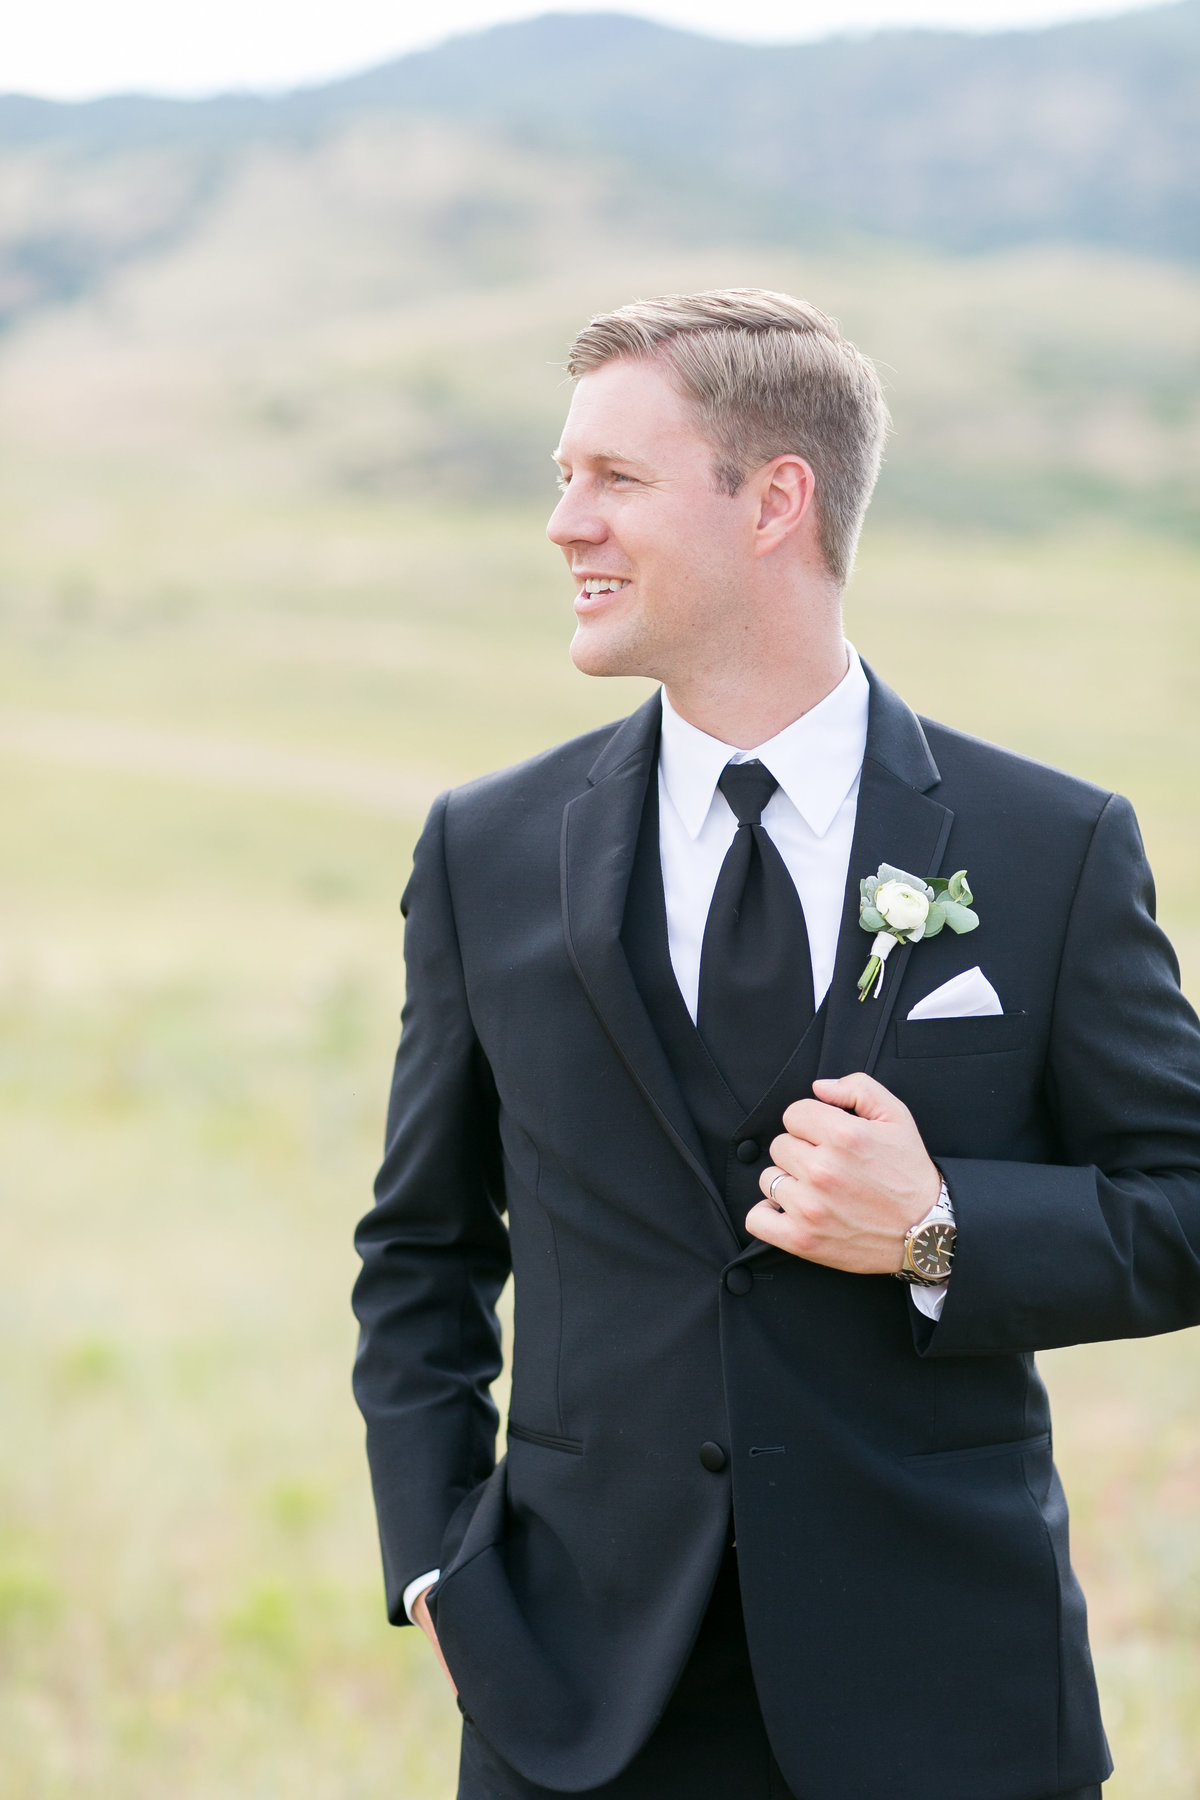 Groom standing in front of mountains